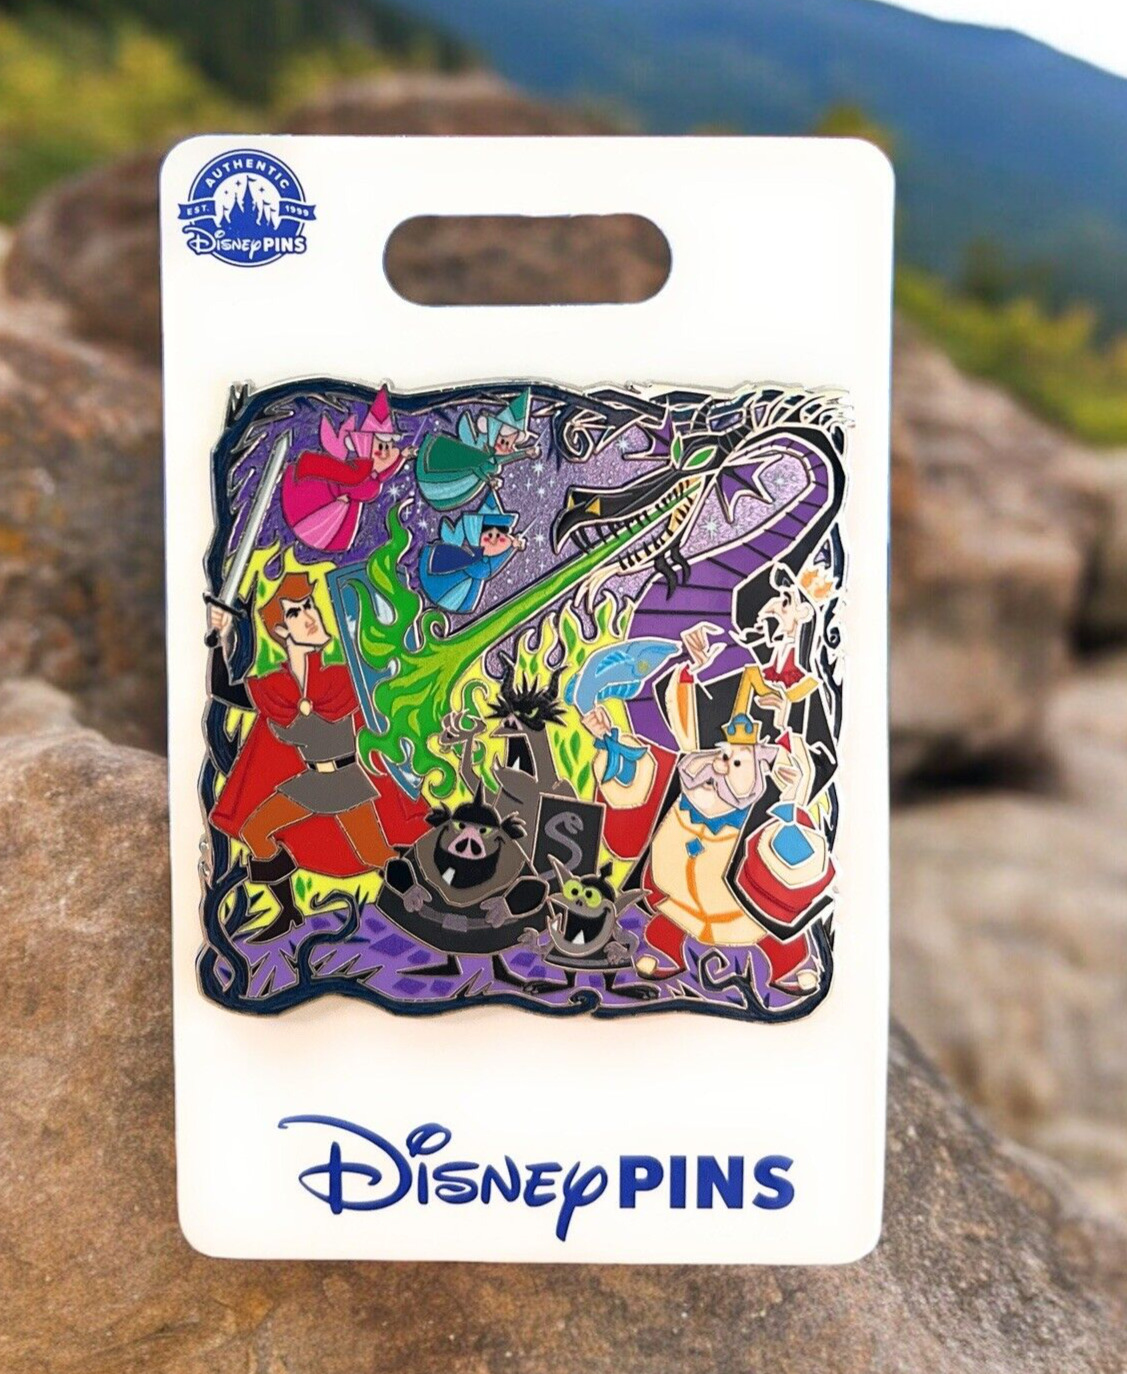 Disney Parks Sleeping Beauty Family Cluster Pin Maleficent Fairies Prince - NEW